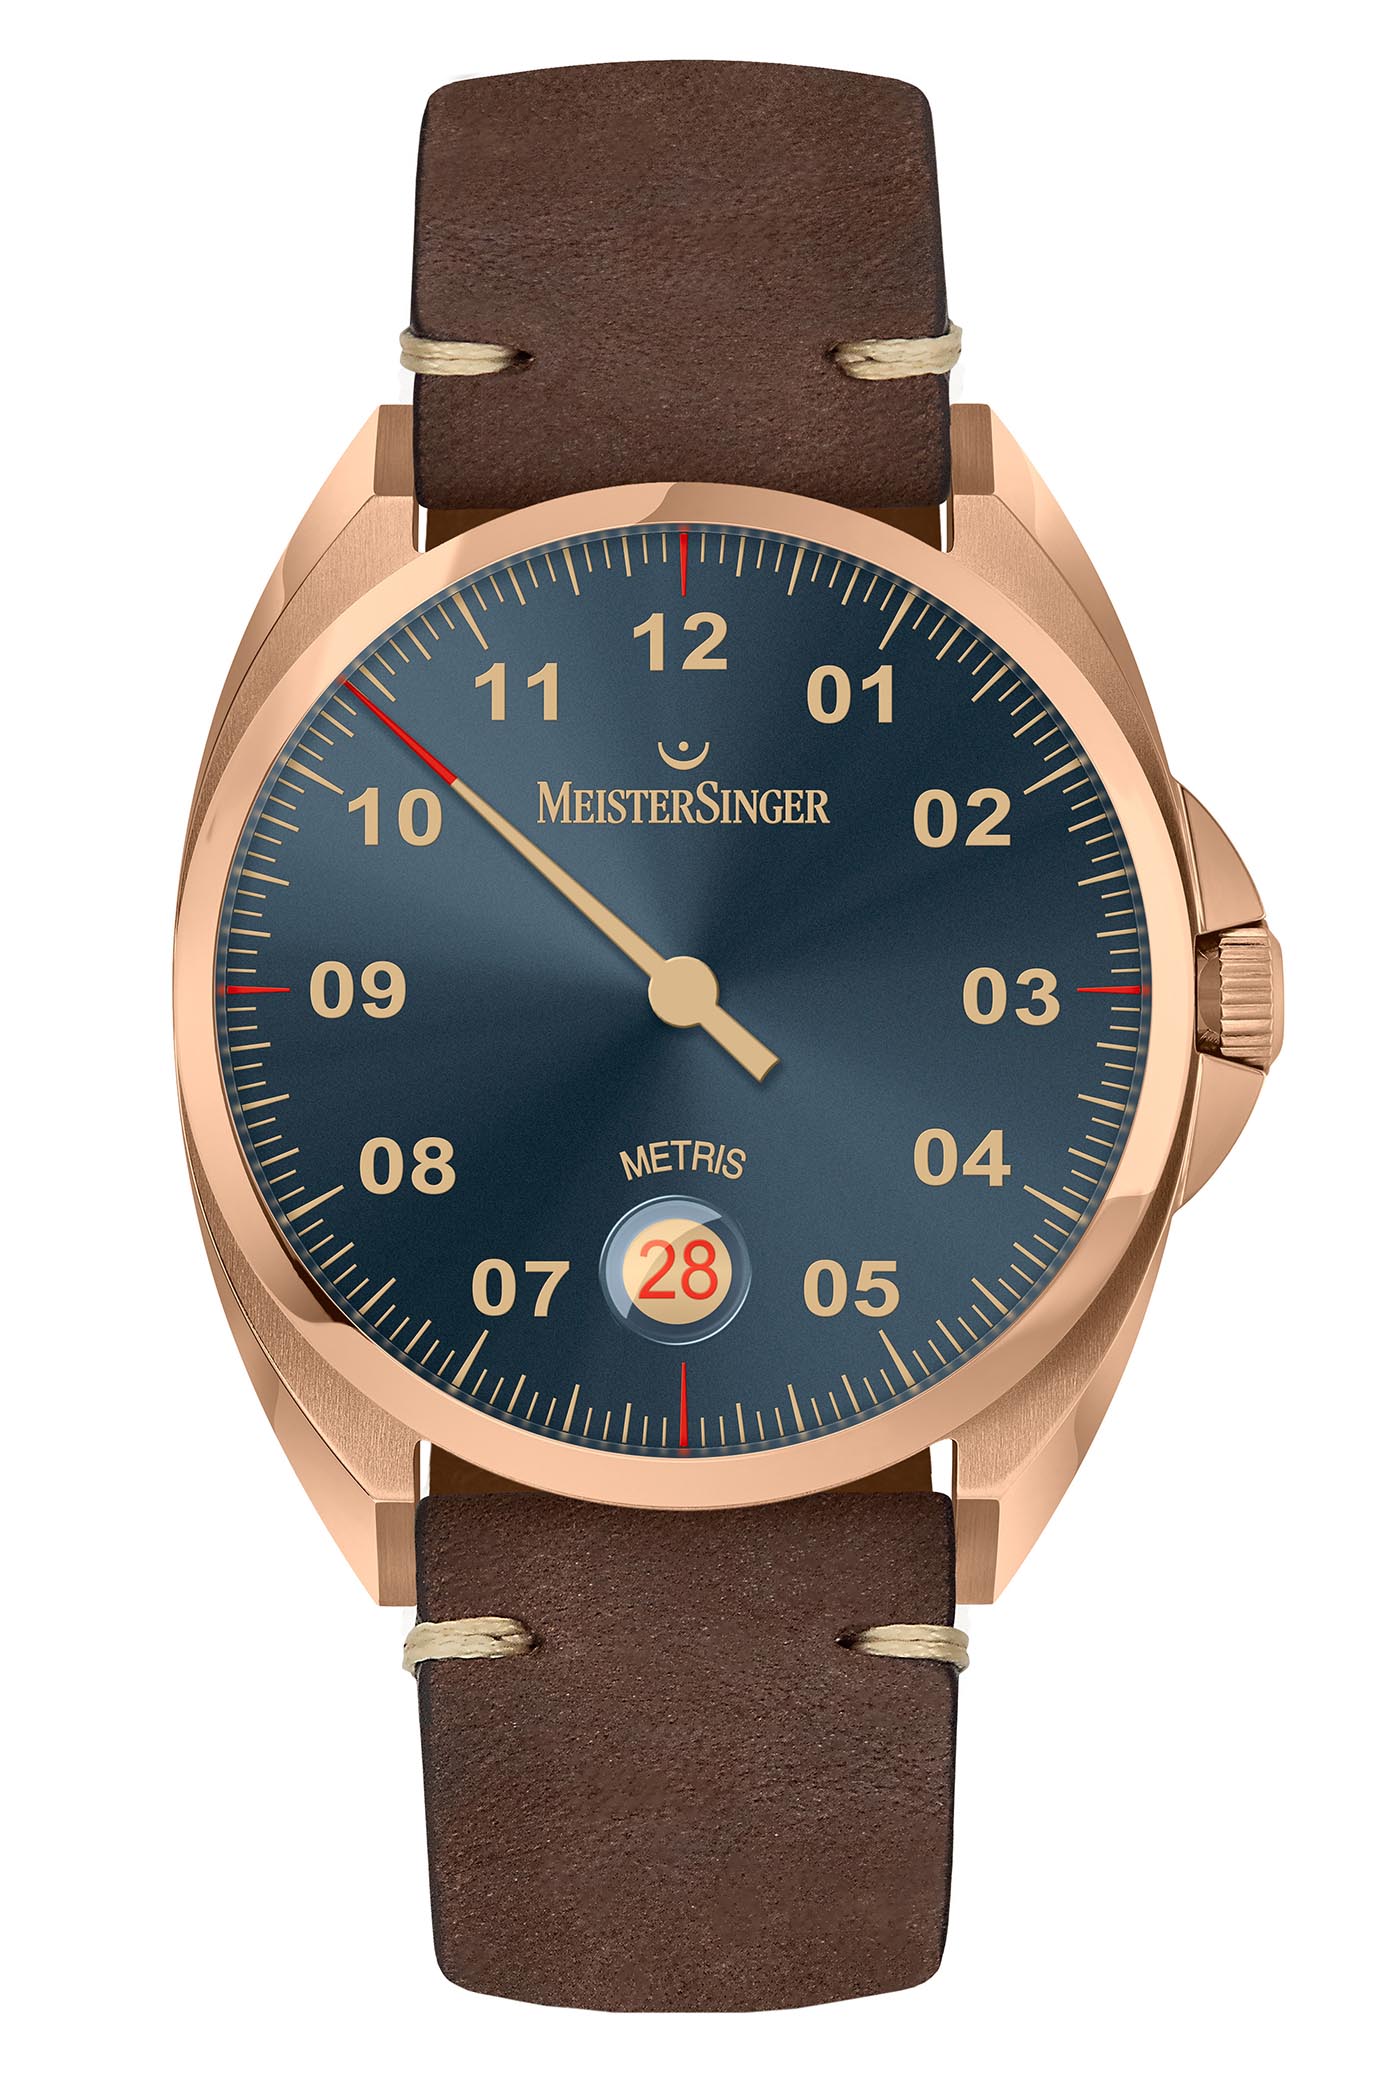 MeisterSinger Perigraph 38 mm Watch in Blue Dial